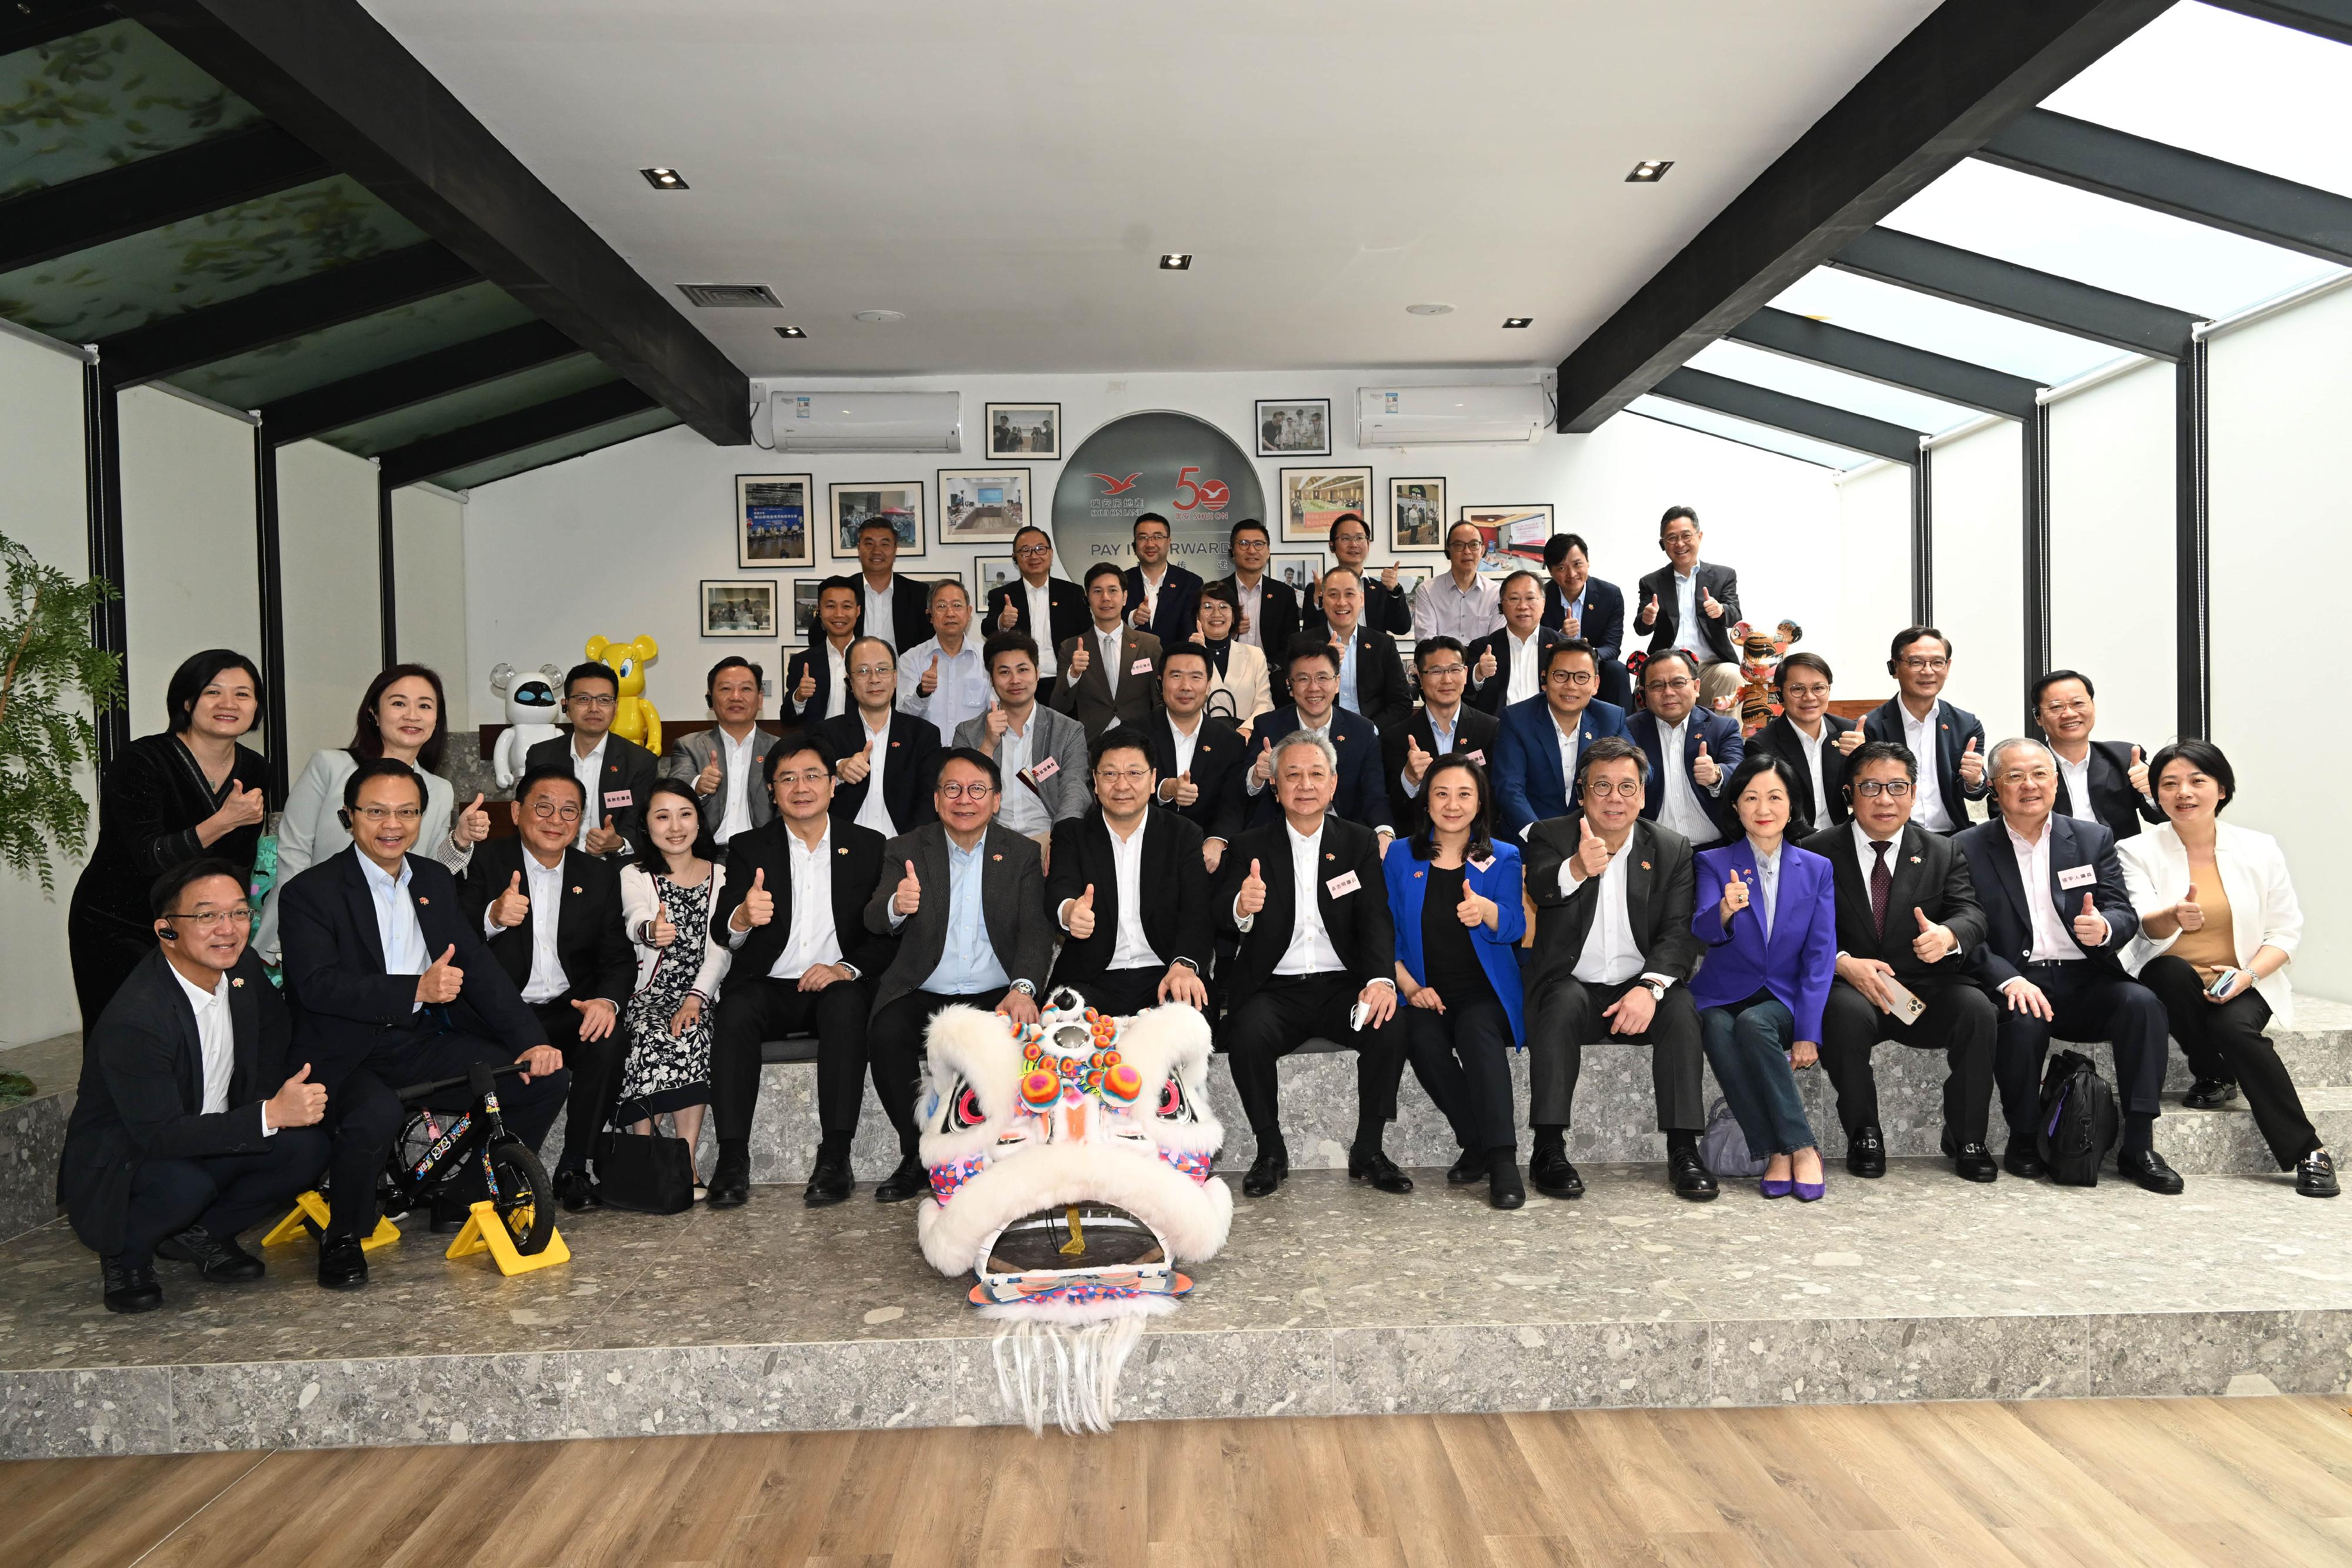 The delegation of the Hong Kong Special Administrative Region Government and the Legislative Council (LegCo) led by the Chief Executive, Mr John Lee, conducted their third-day visit in the Guangdong-Hong Kong-Macao Greater Bay Area today (April 23). Photo shows the Chief Secretary for Administration, Mr Chan Kwok-ki (first row, sixth left); the Secretary for Commerce and Economic Development, Mr Algernon Yau (first row, fifth right); the Secretary for Innovation, Technology and Industry, Professor Sun Dong (second row, seventh right); and LegCo members at the Jian's Villa located at the Foshan Lingnan Tiandi.